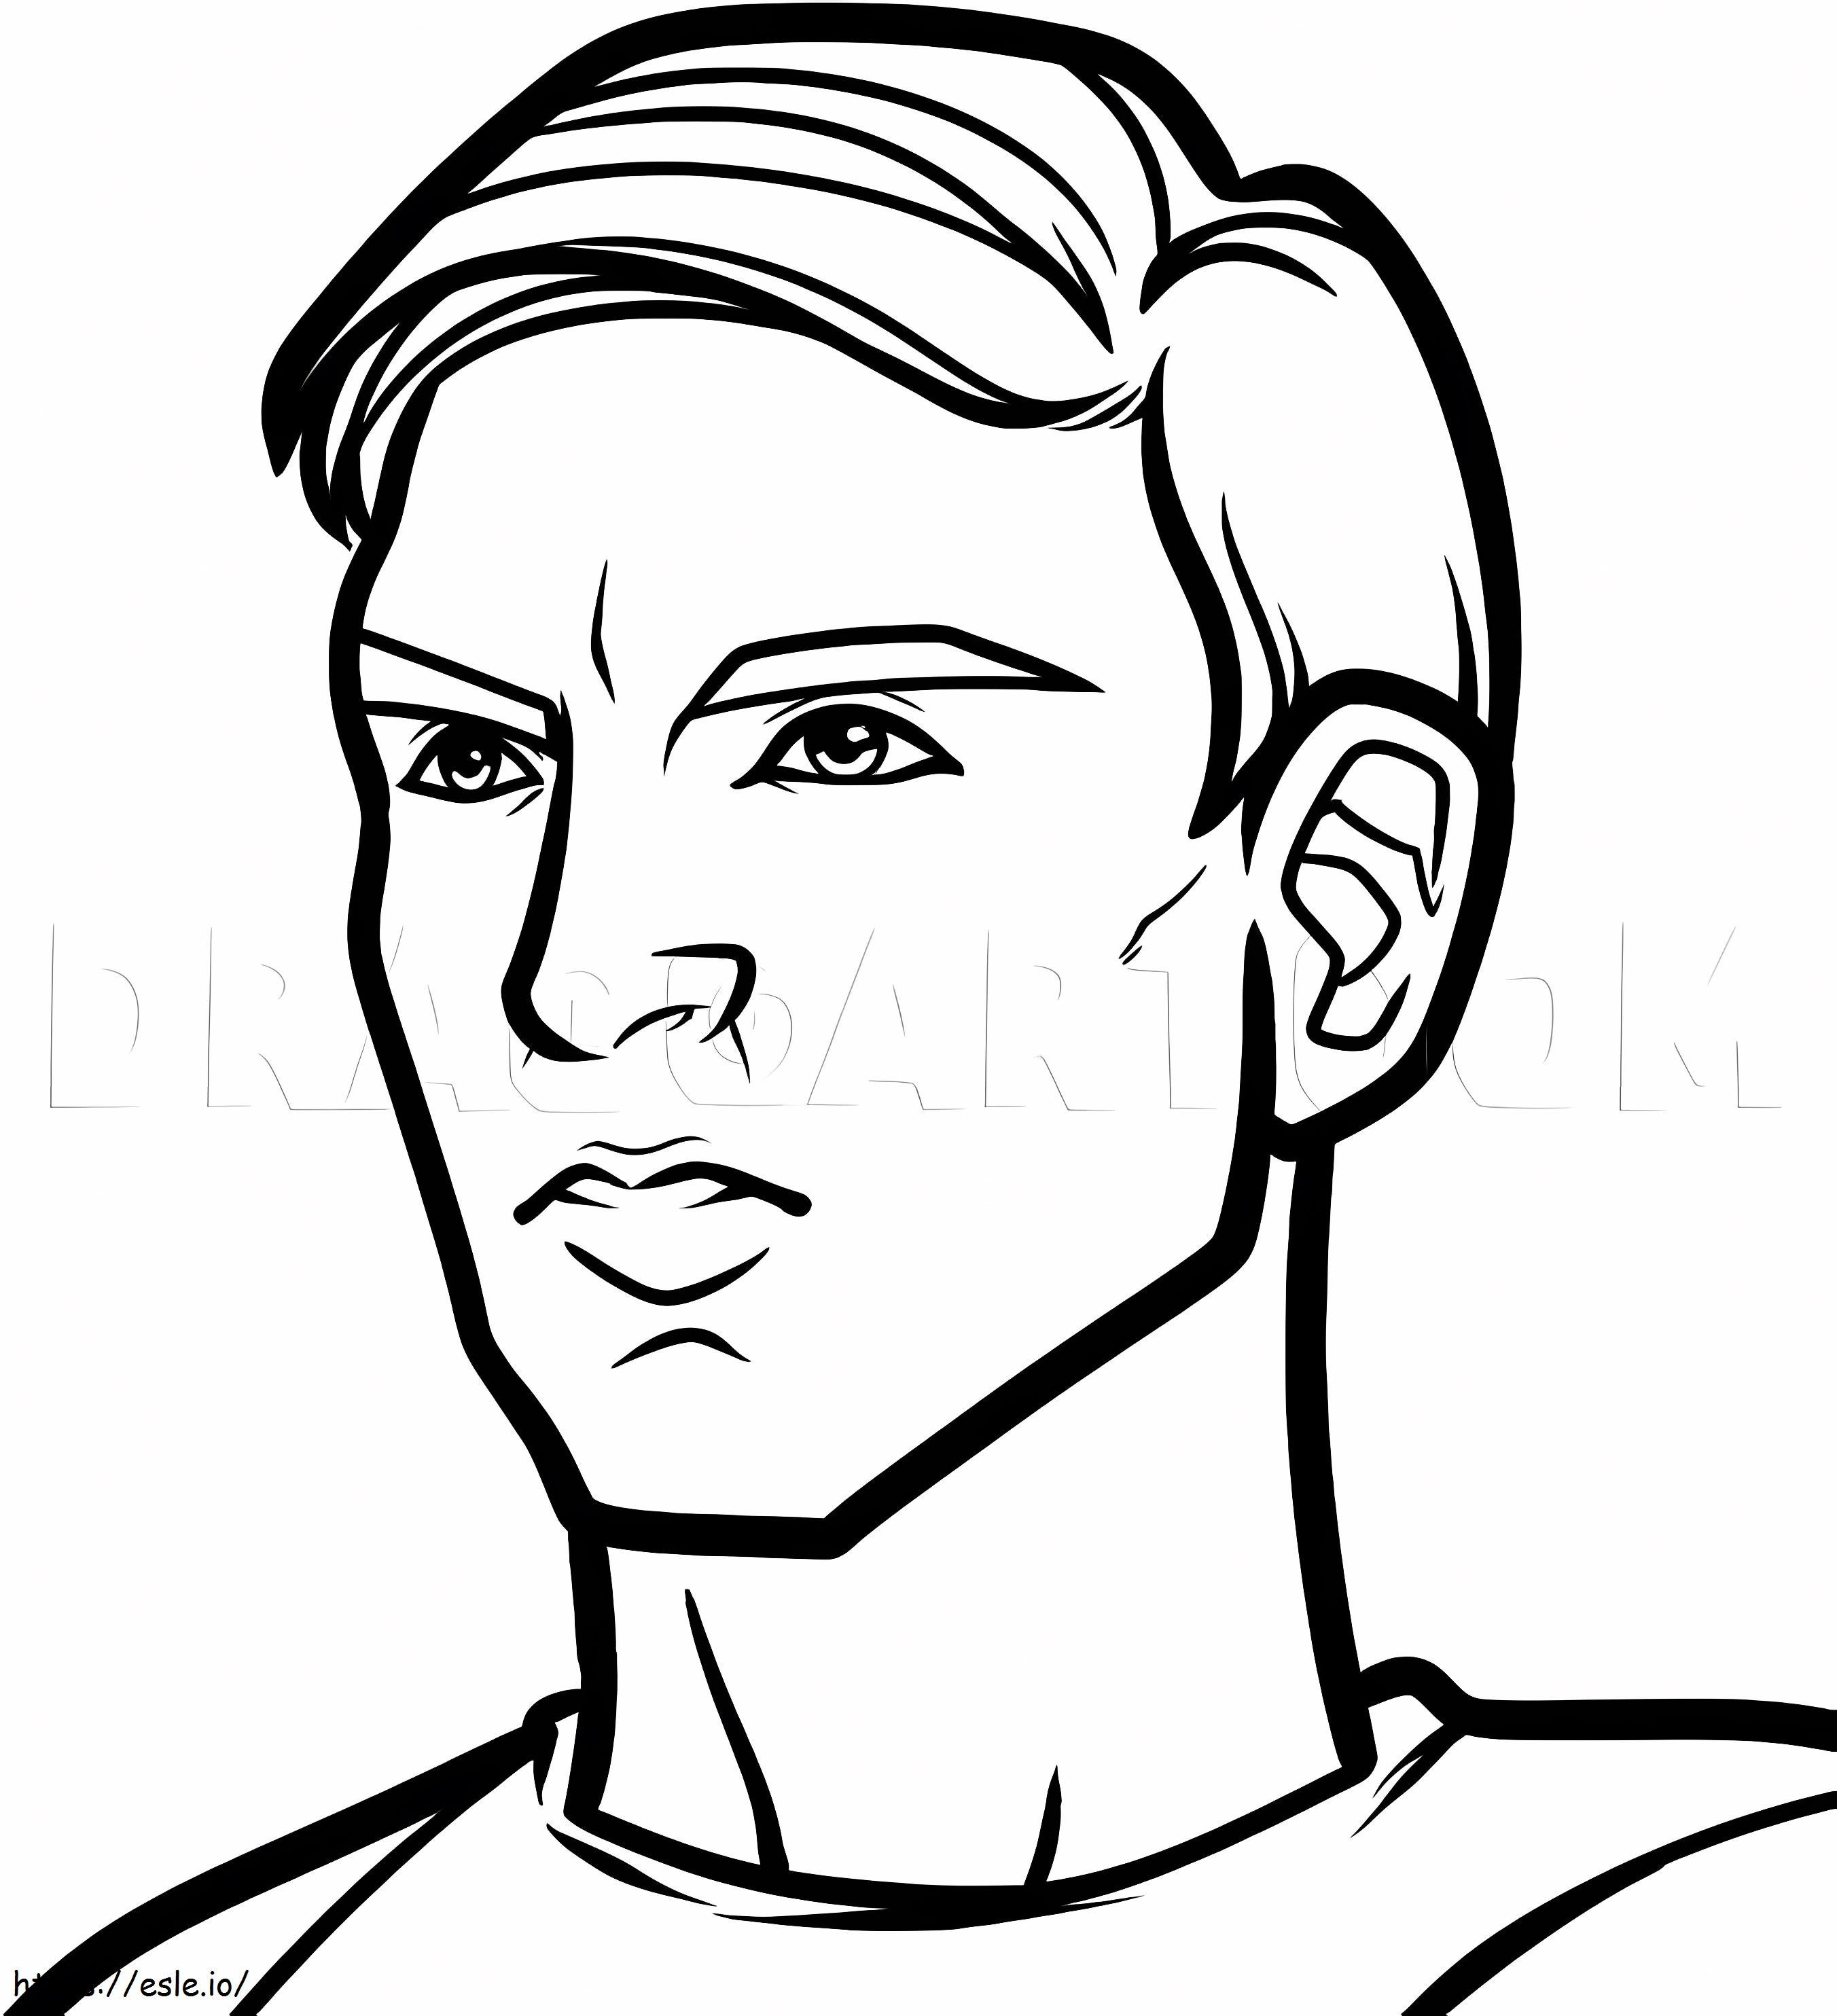 Draw Little Chris Evans coloring page